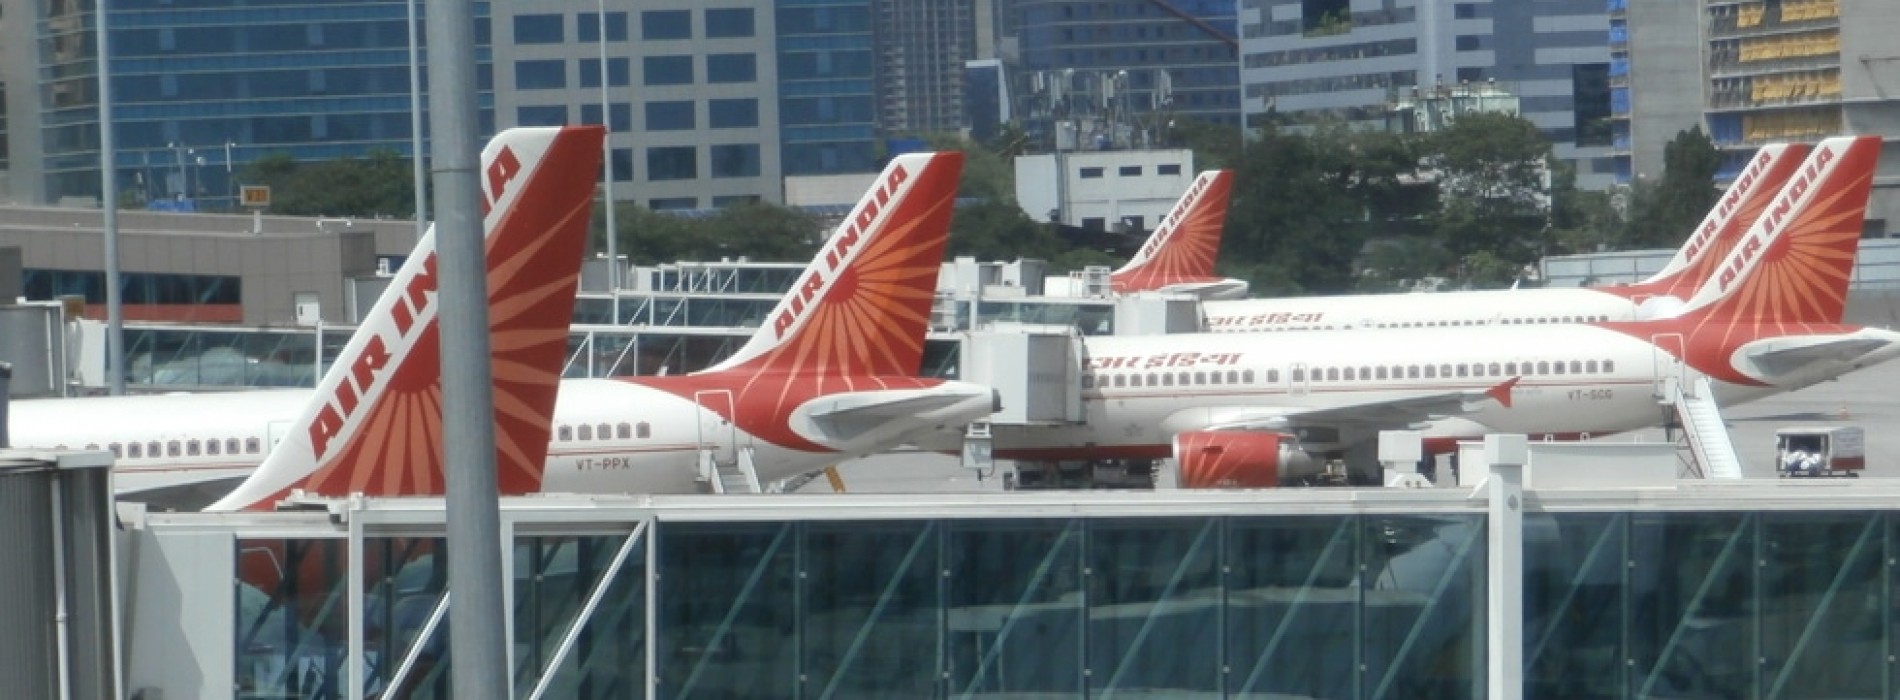 Air India to be sold out by the end of 2018, says Civil Aviation Minister